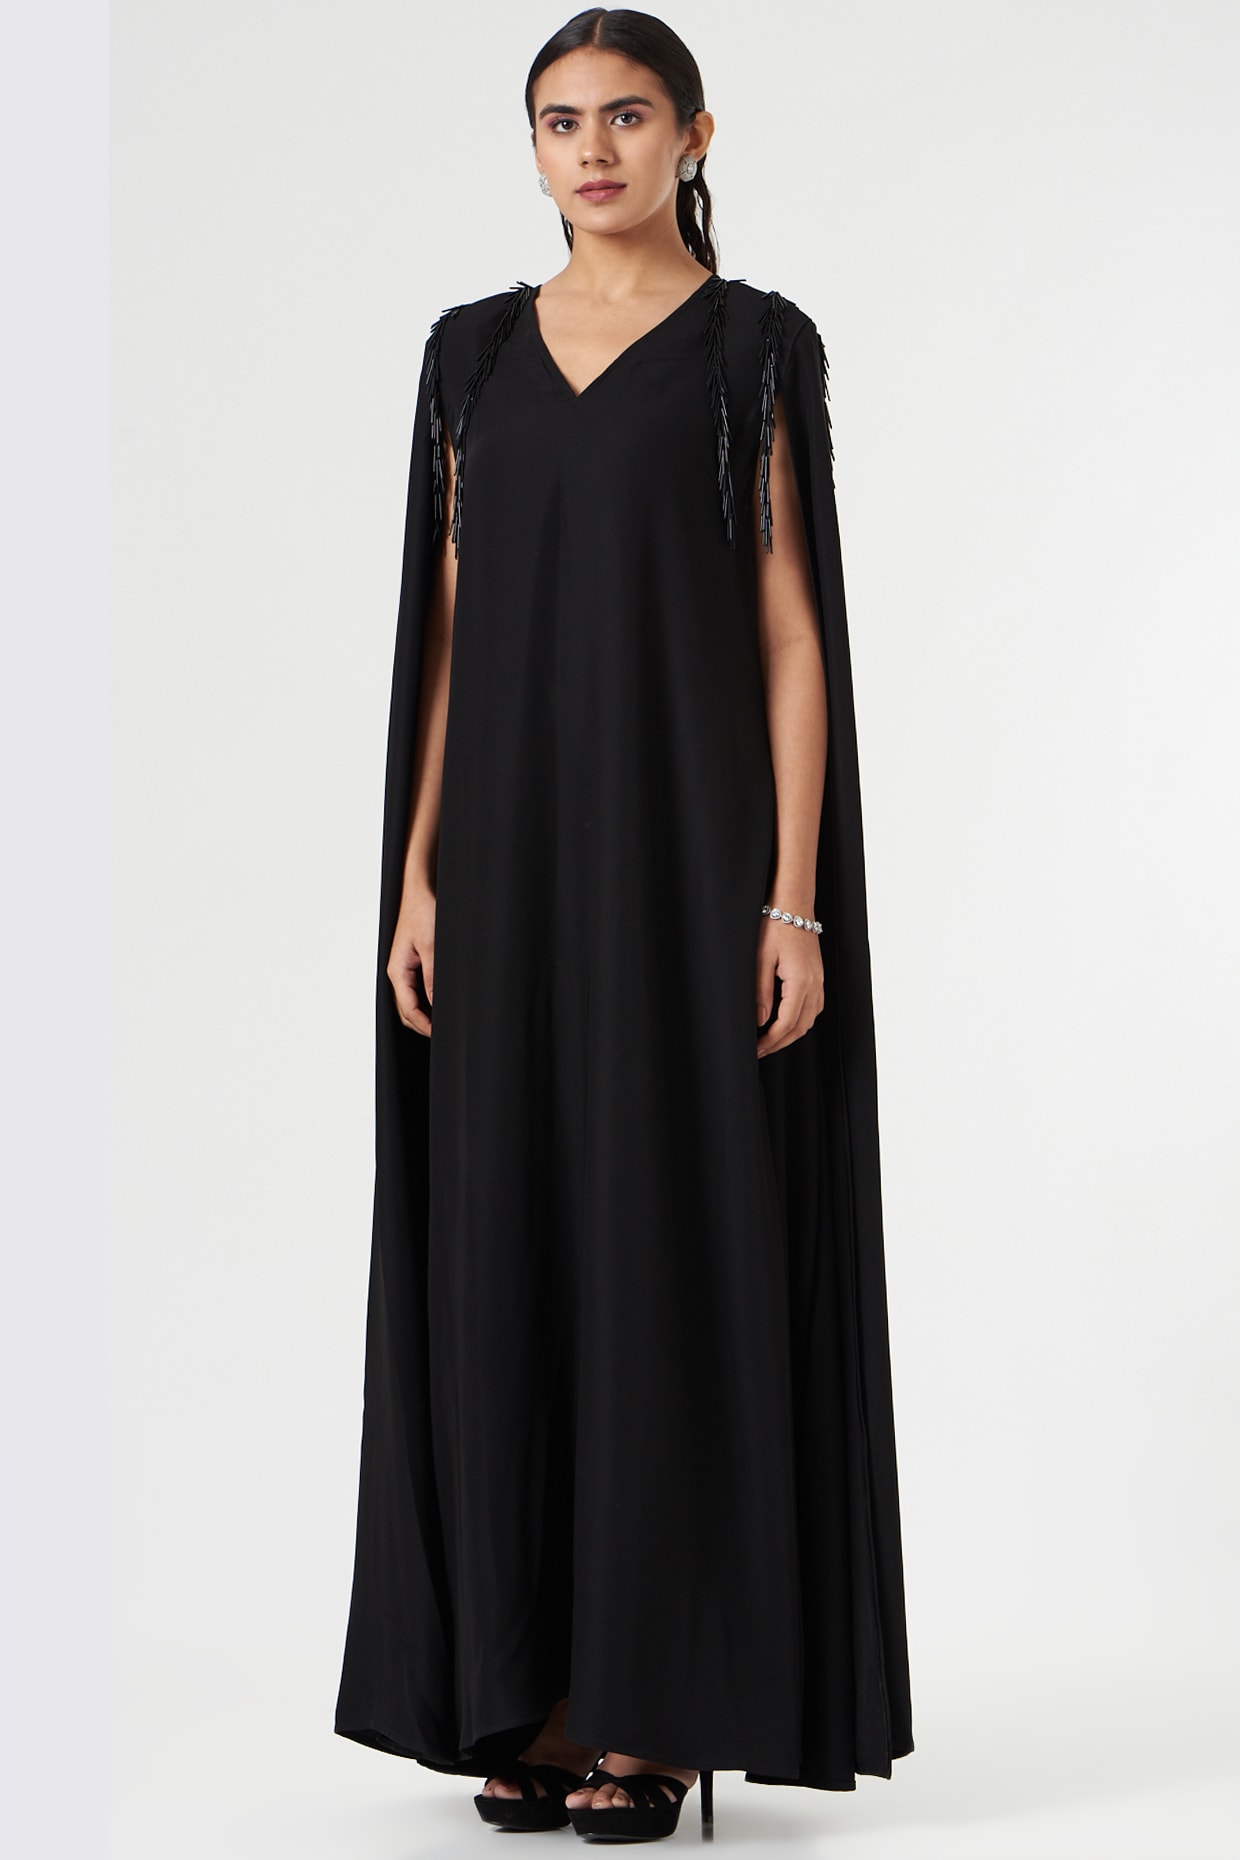 Ivory Cape Black Gown – shoprodeodrive